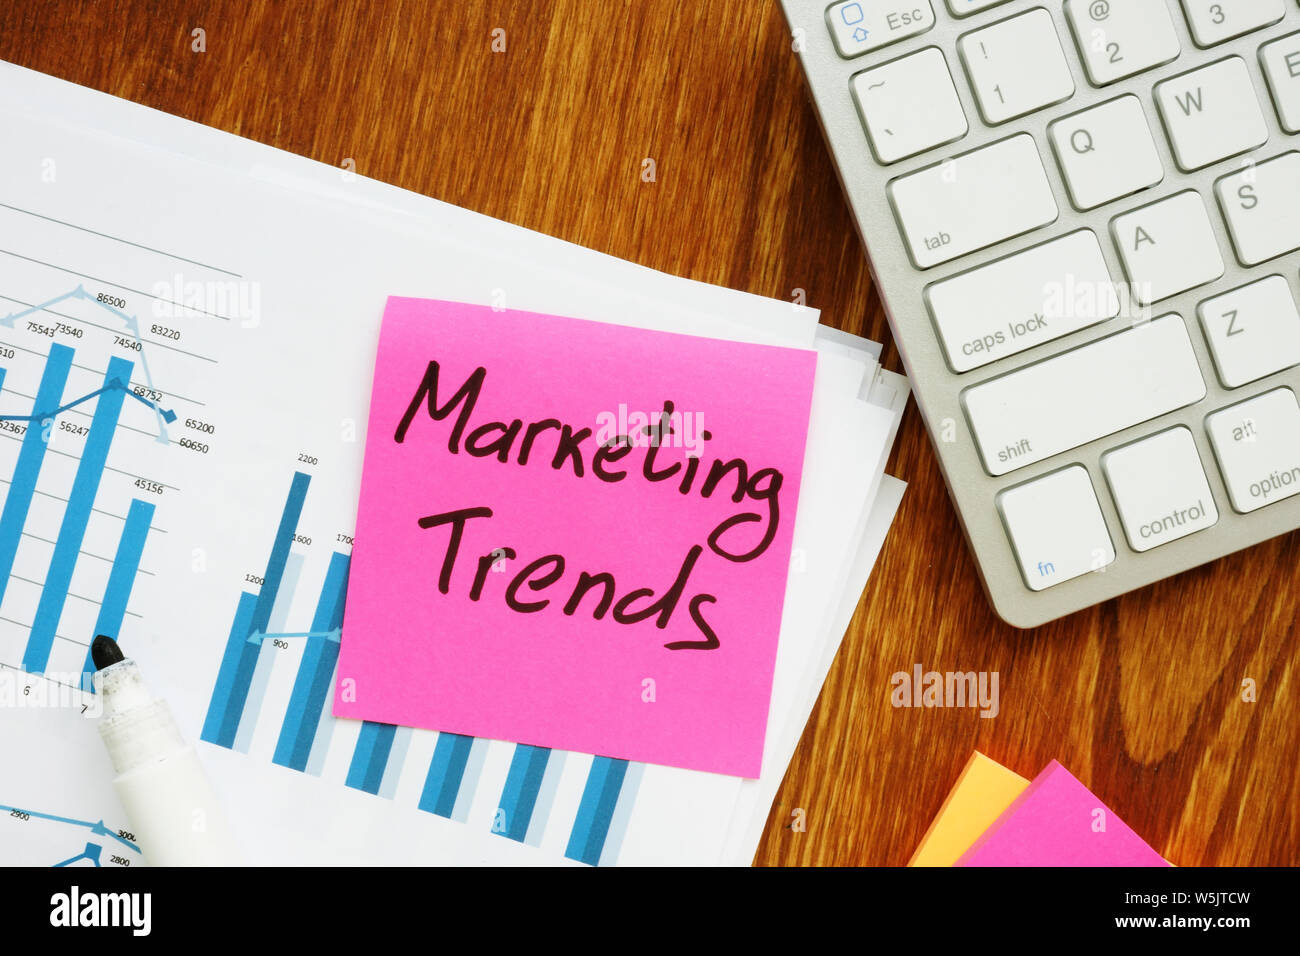 Marketing trends analysis report on the desk. Stock Photo